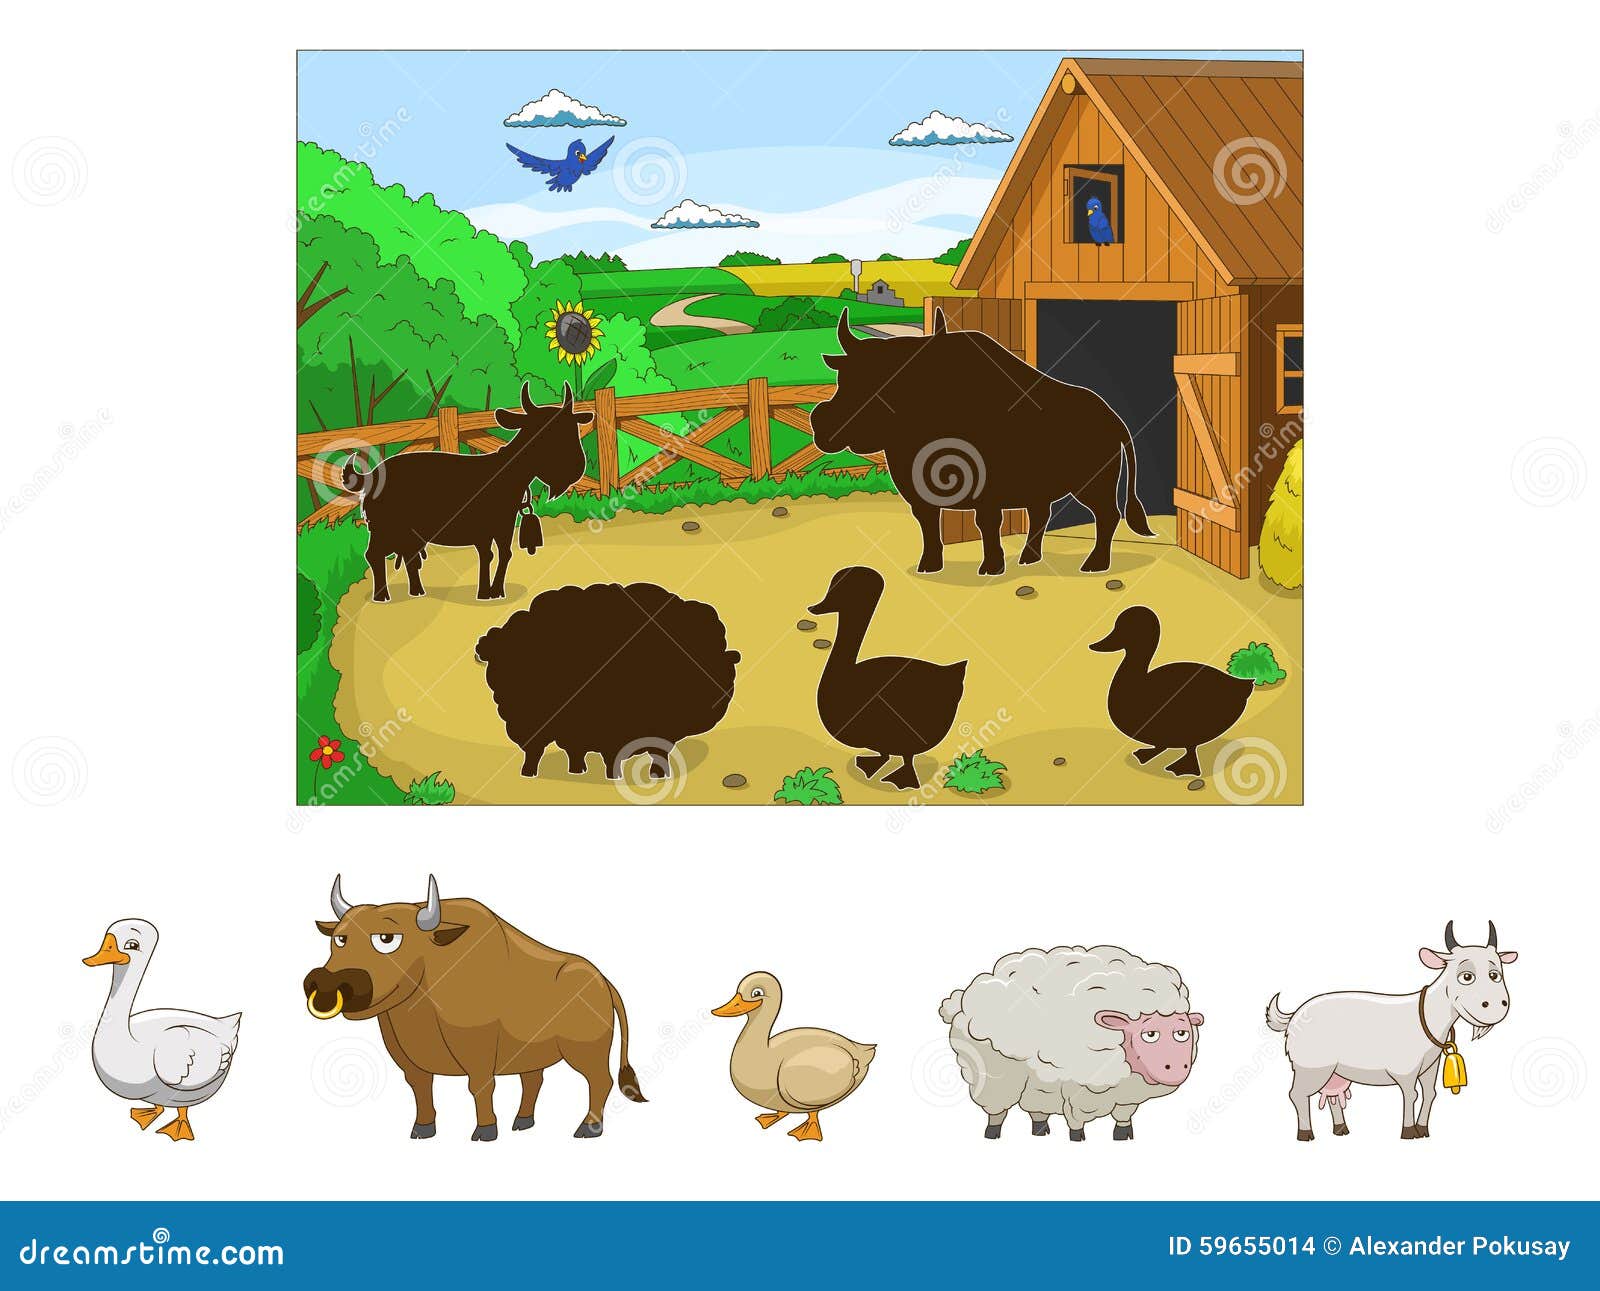 match the animals to their shadows child game